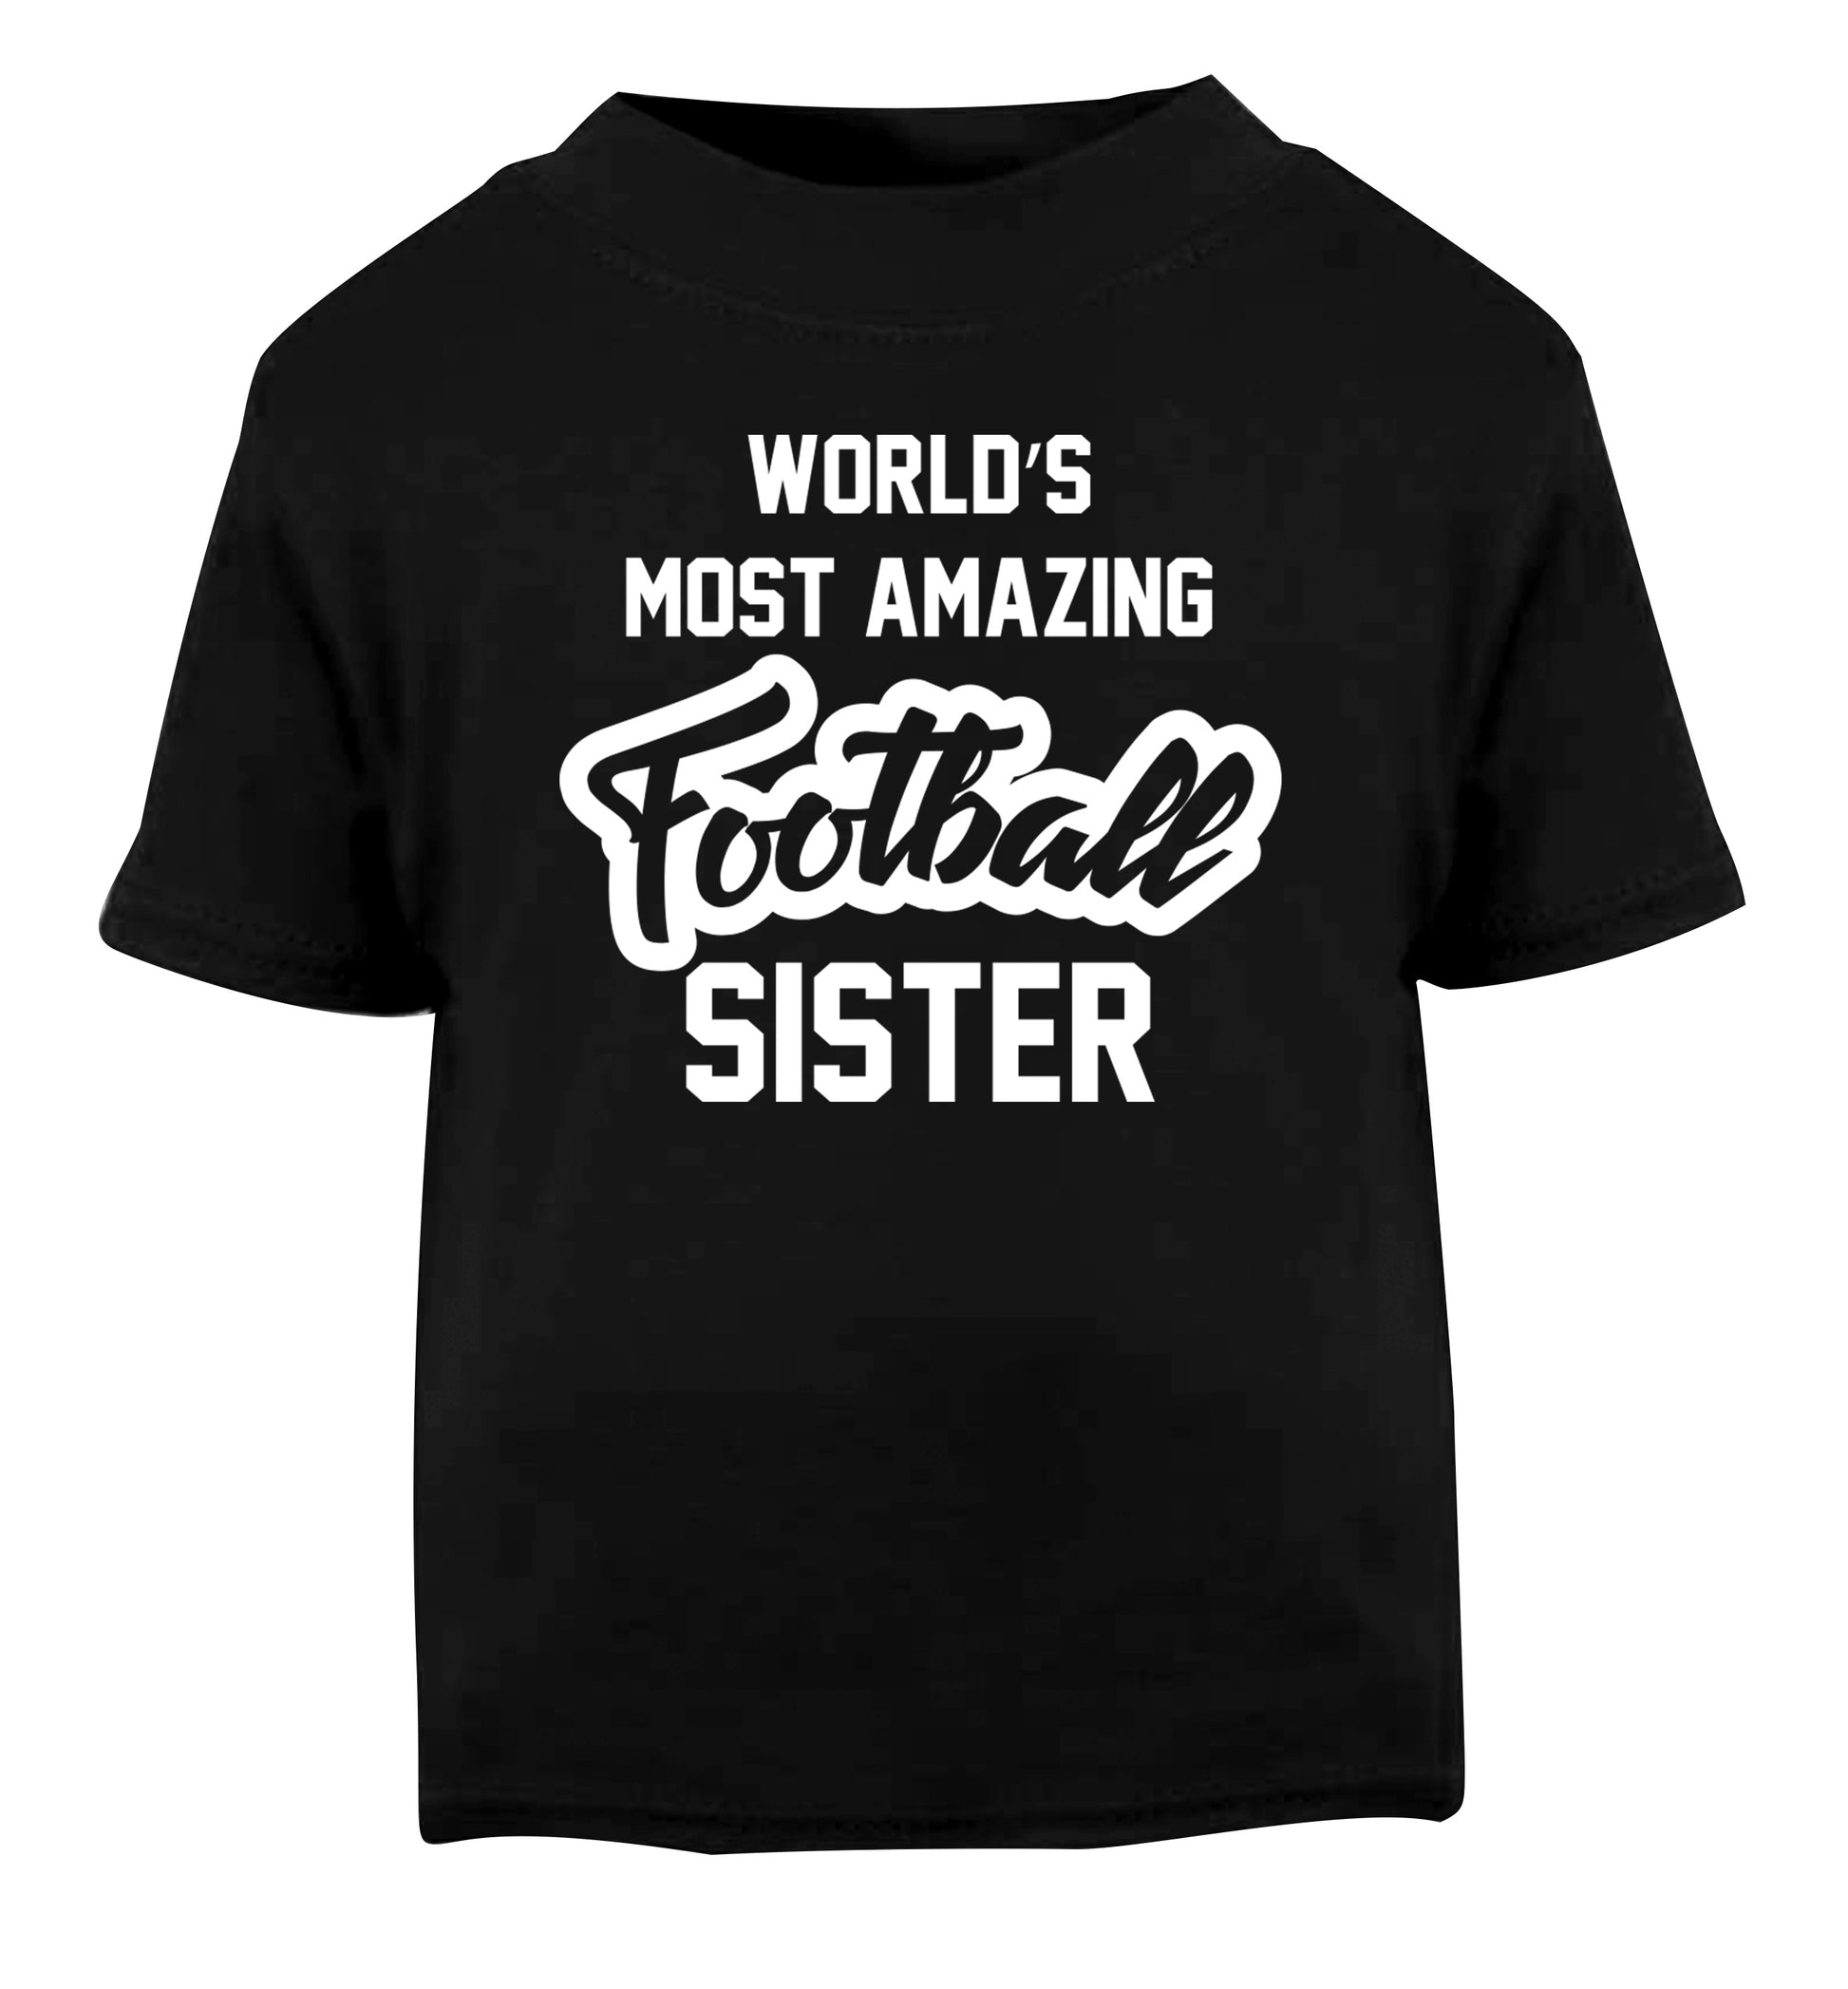 Worlds most amazing football sister Black Baby Toddler Tshirt 2 years